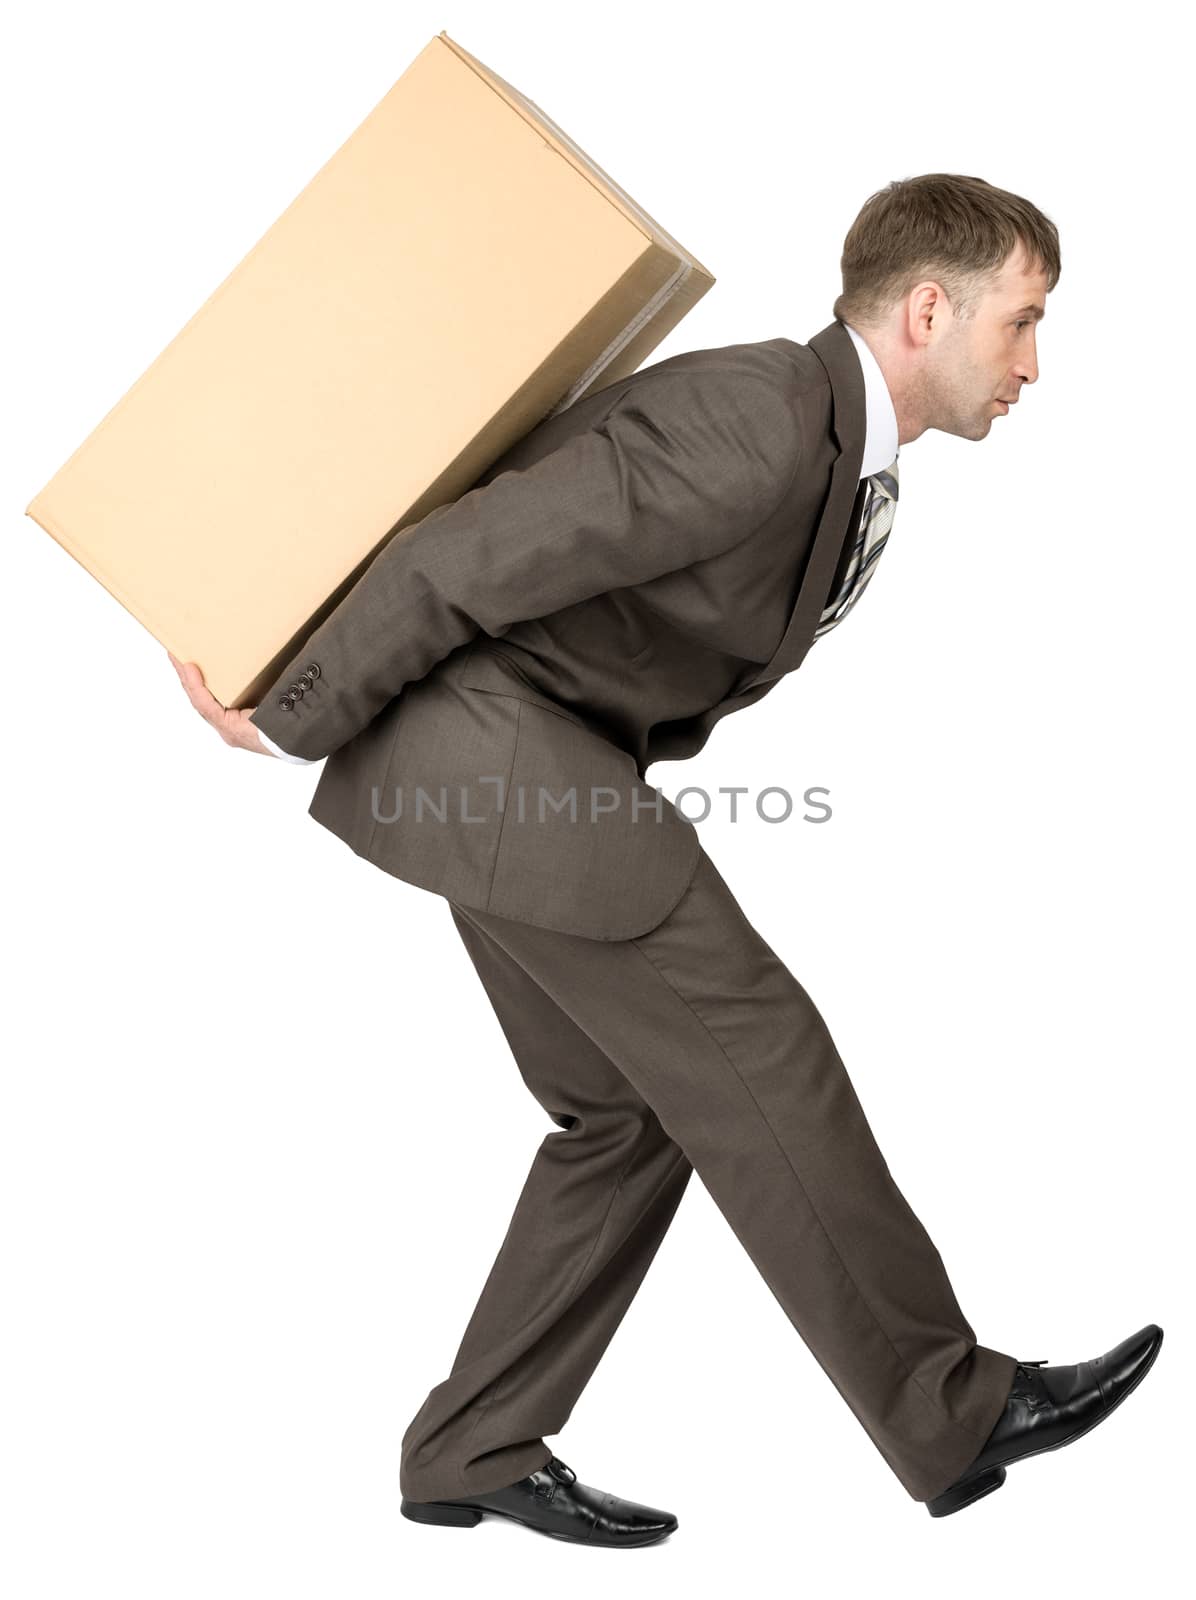 Businessman holding packages on back, looks forward. Isolated on white background